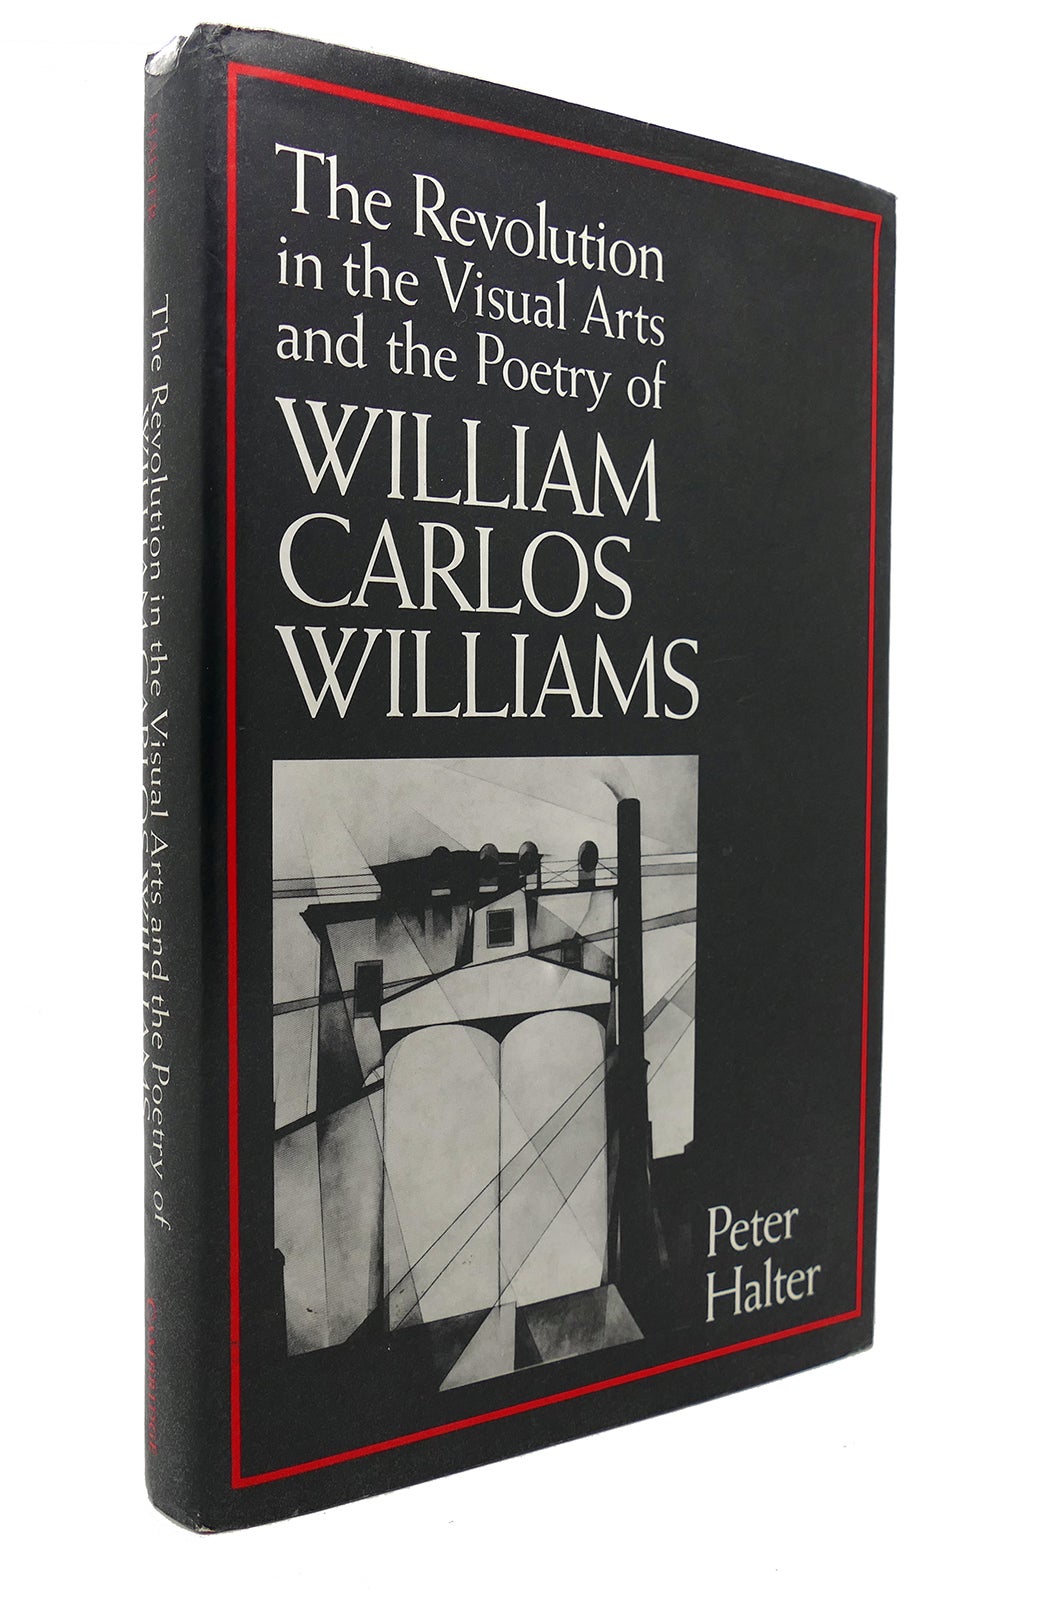 THE REVOLUTION IN THE VISUAL ARTS AND THE POETRY OF WILLIAM CARLOS WILLIAMS, Peter Halter William Carlos Williams